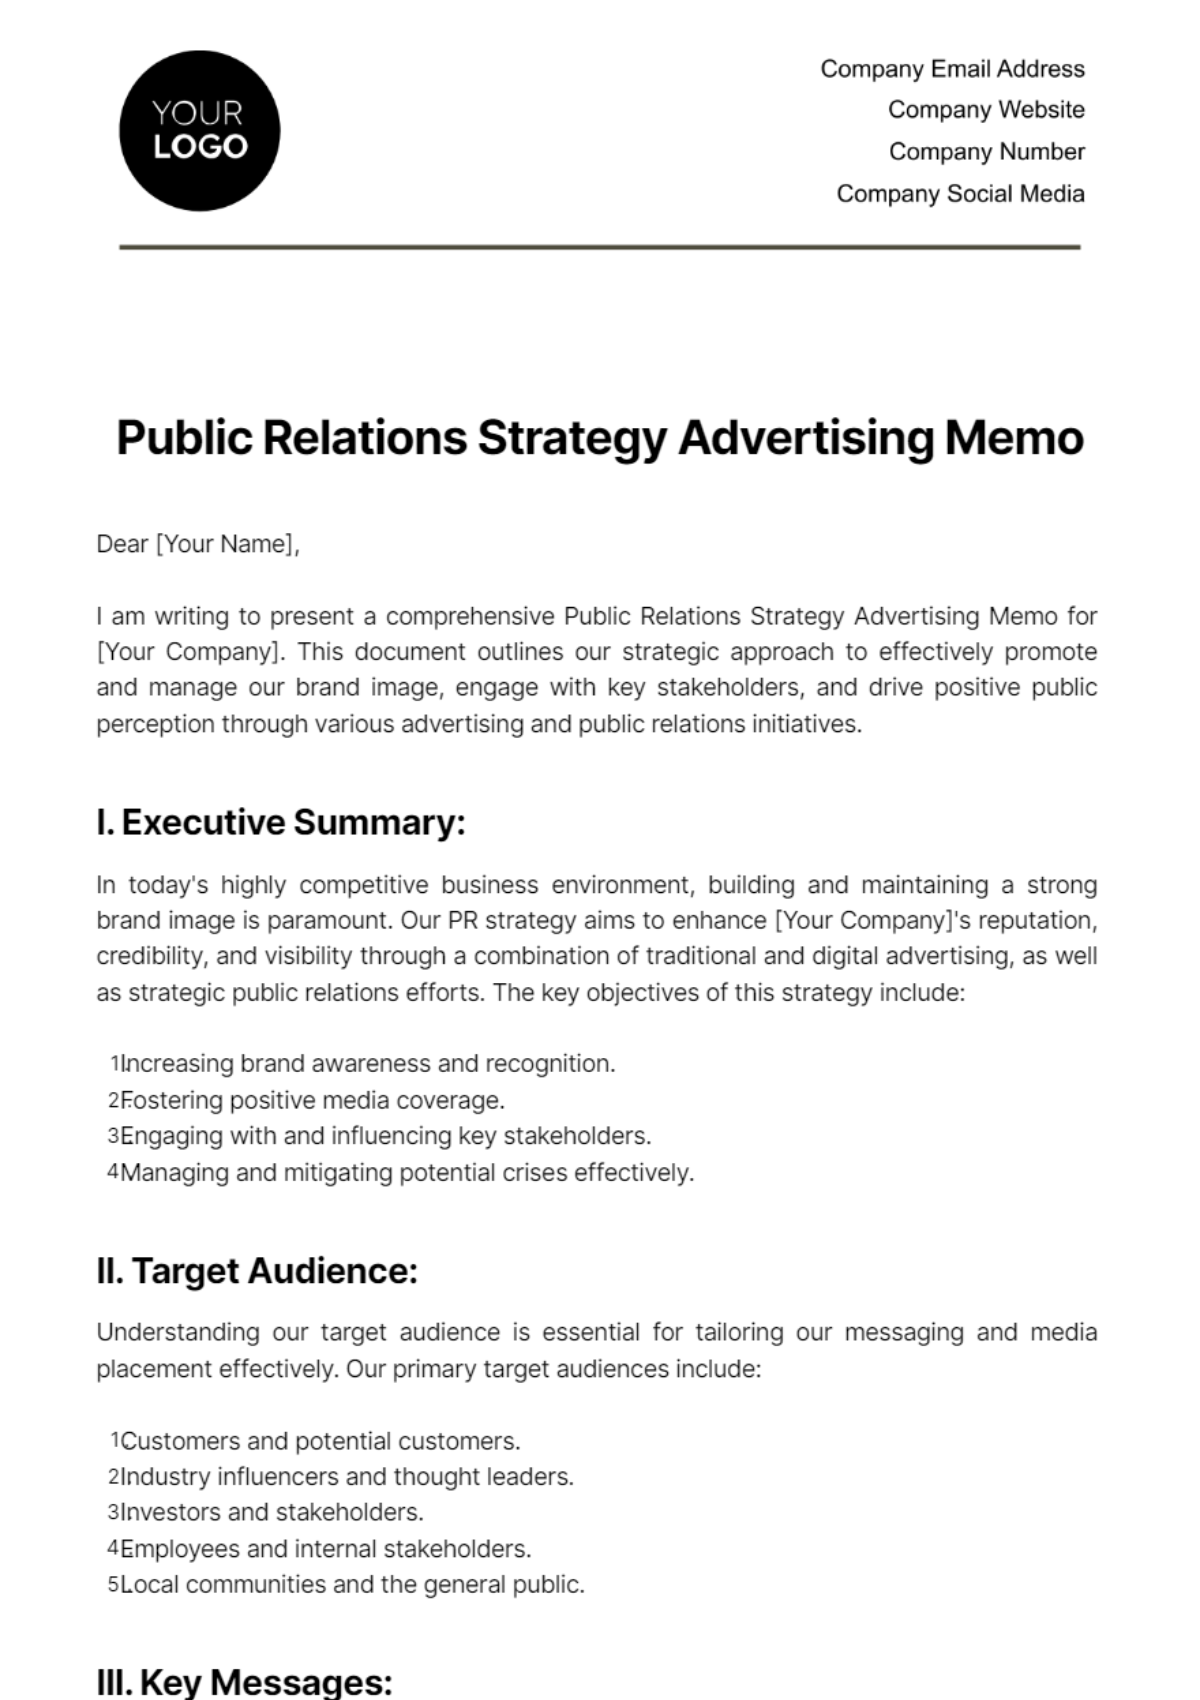 Free Public Relations Strategy Advertising Memo Template